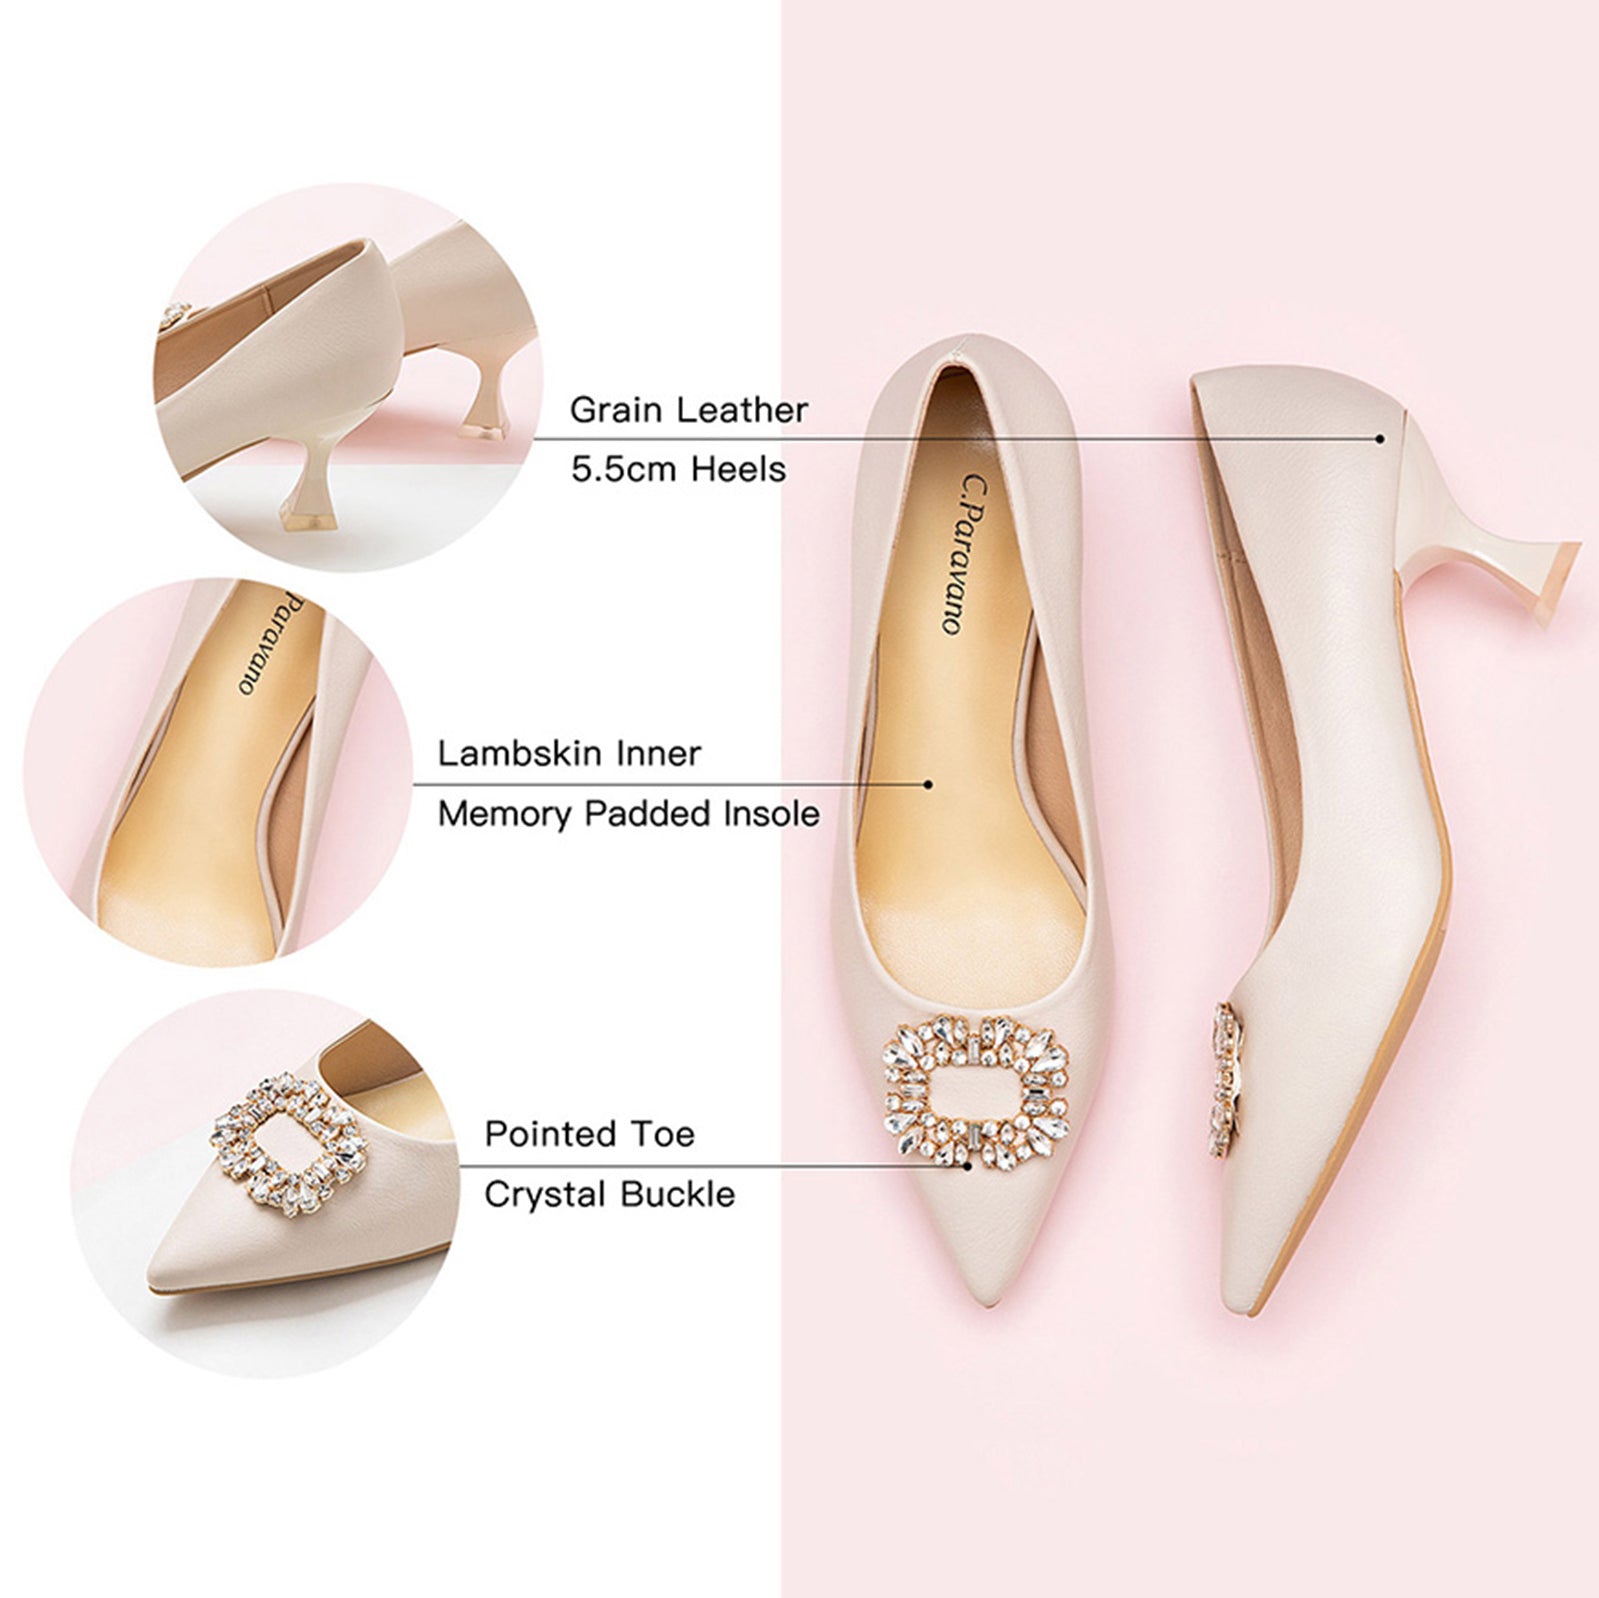 Classic White Charm: White Buckle Kitten Heel Pumps with embellishments, a timeless and elegant addition to your footwear collection